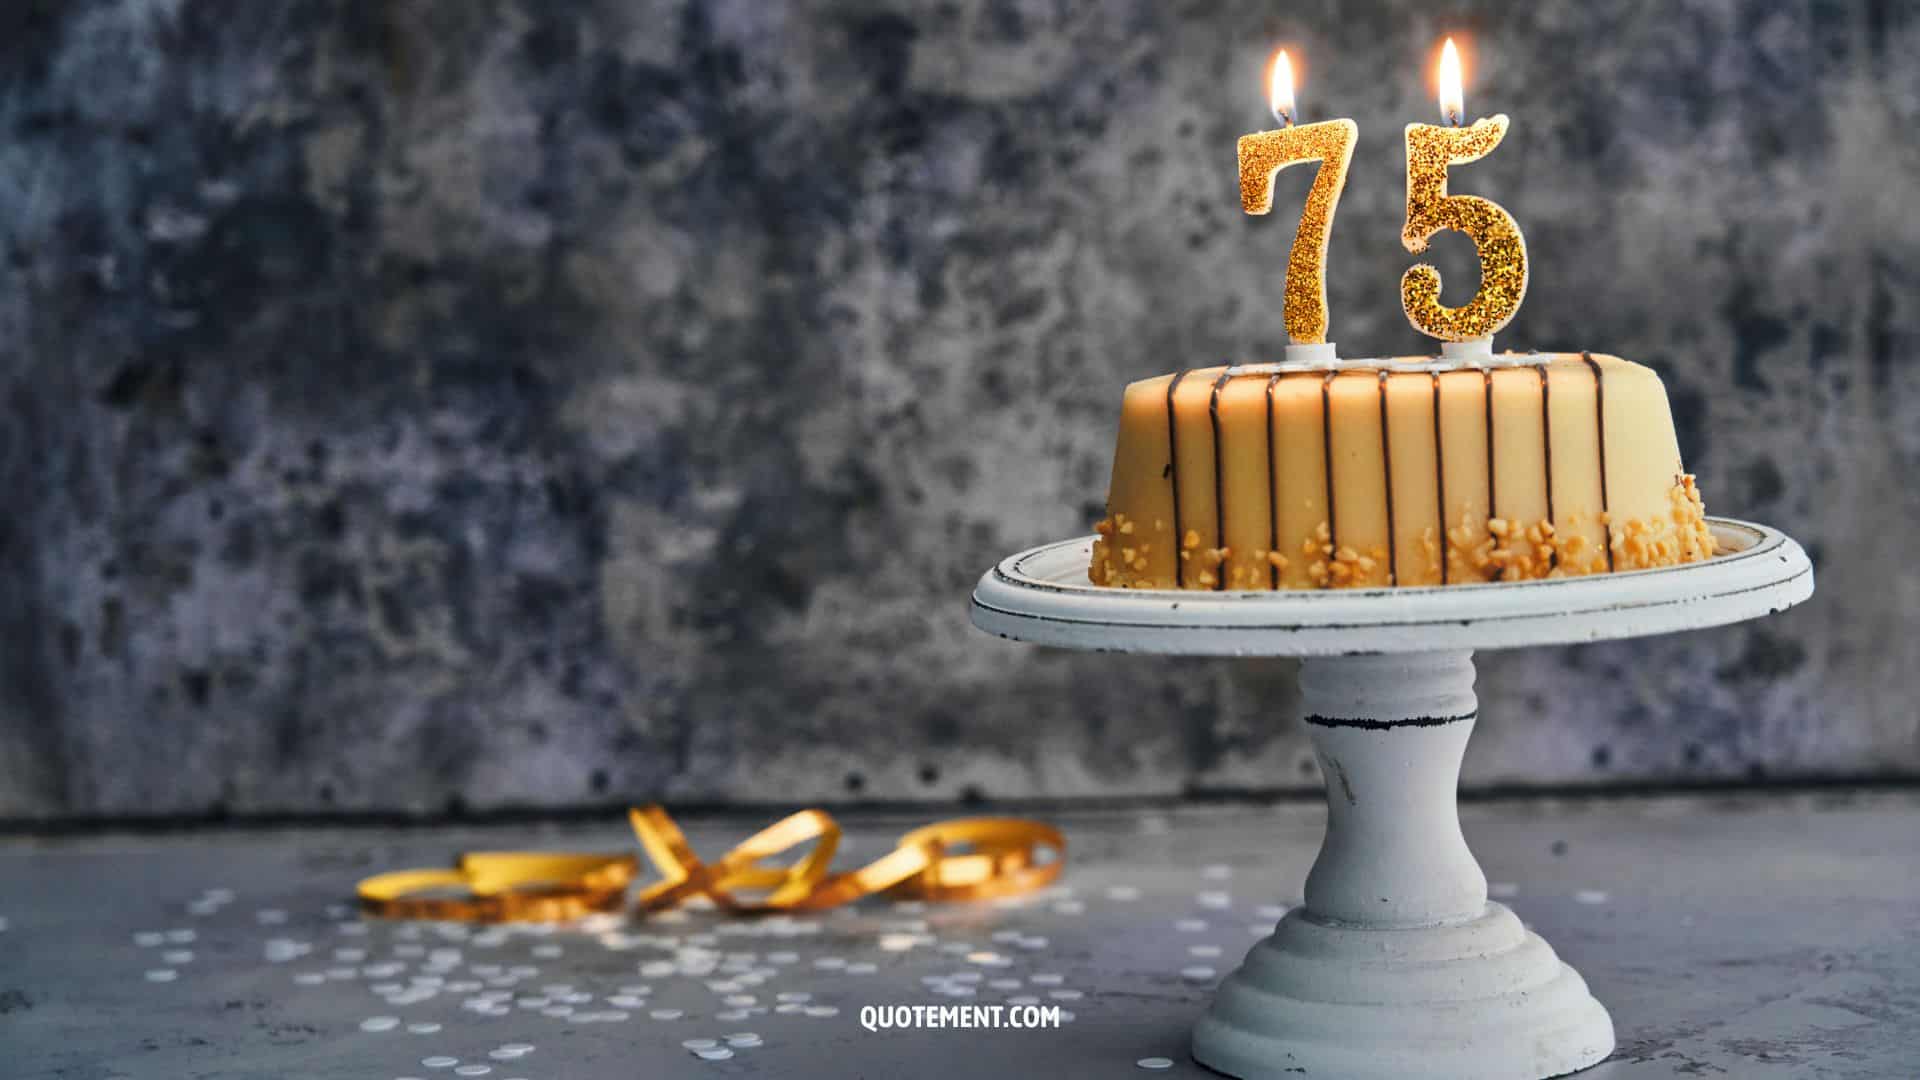 congratulations on your 75th birthday